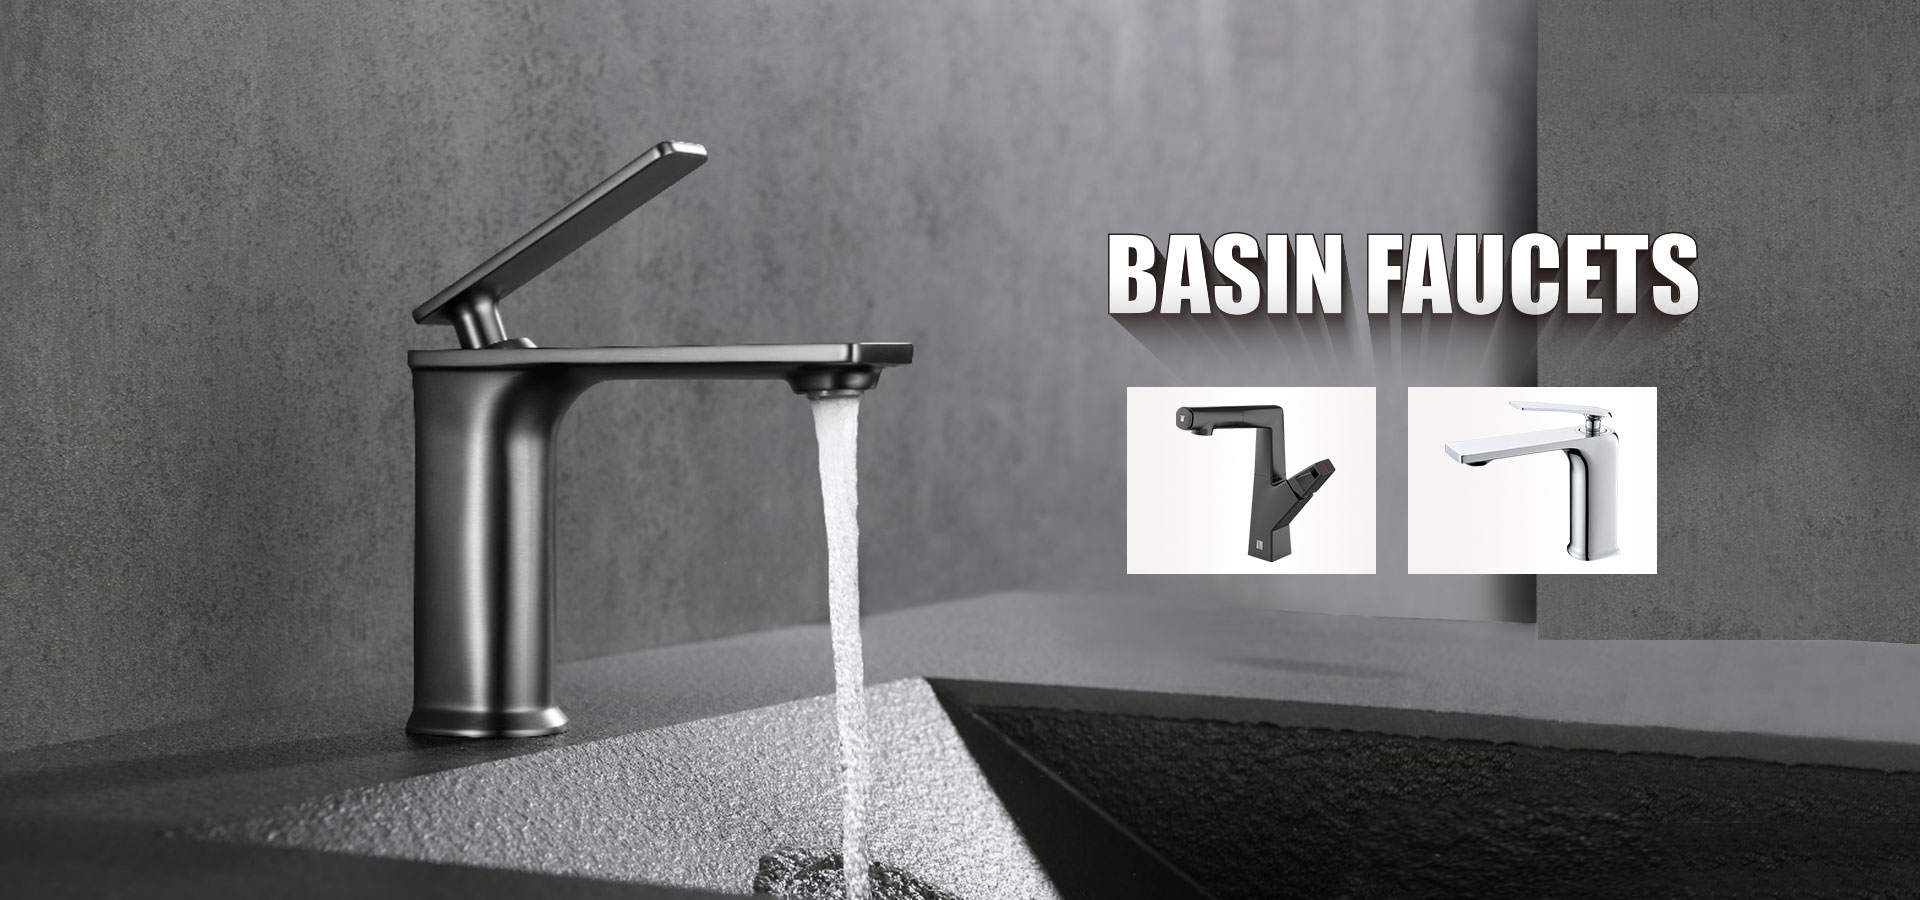 Sina Rasin Faucets Suppliers